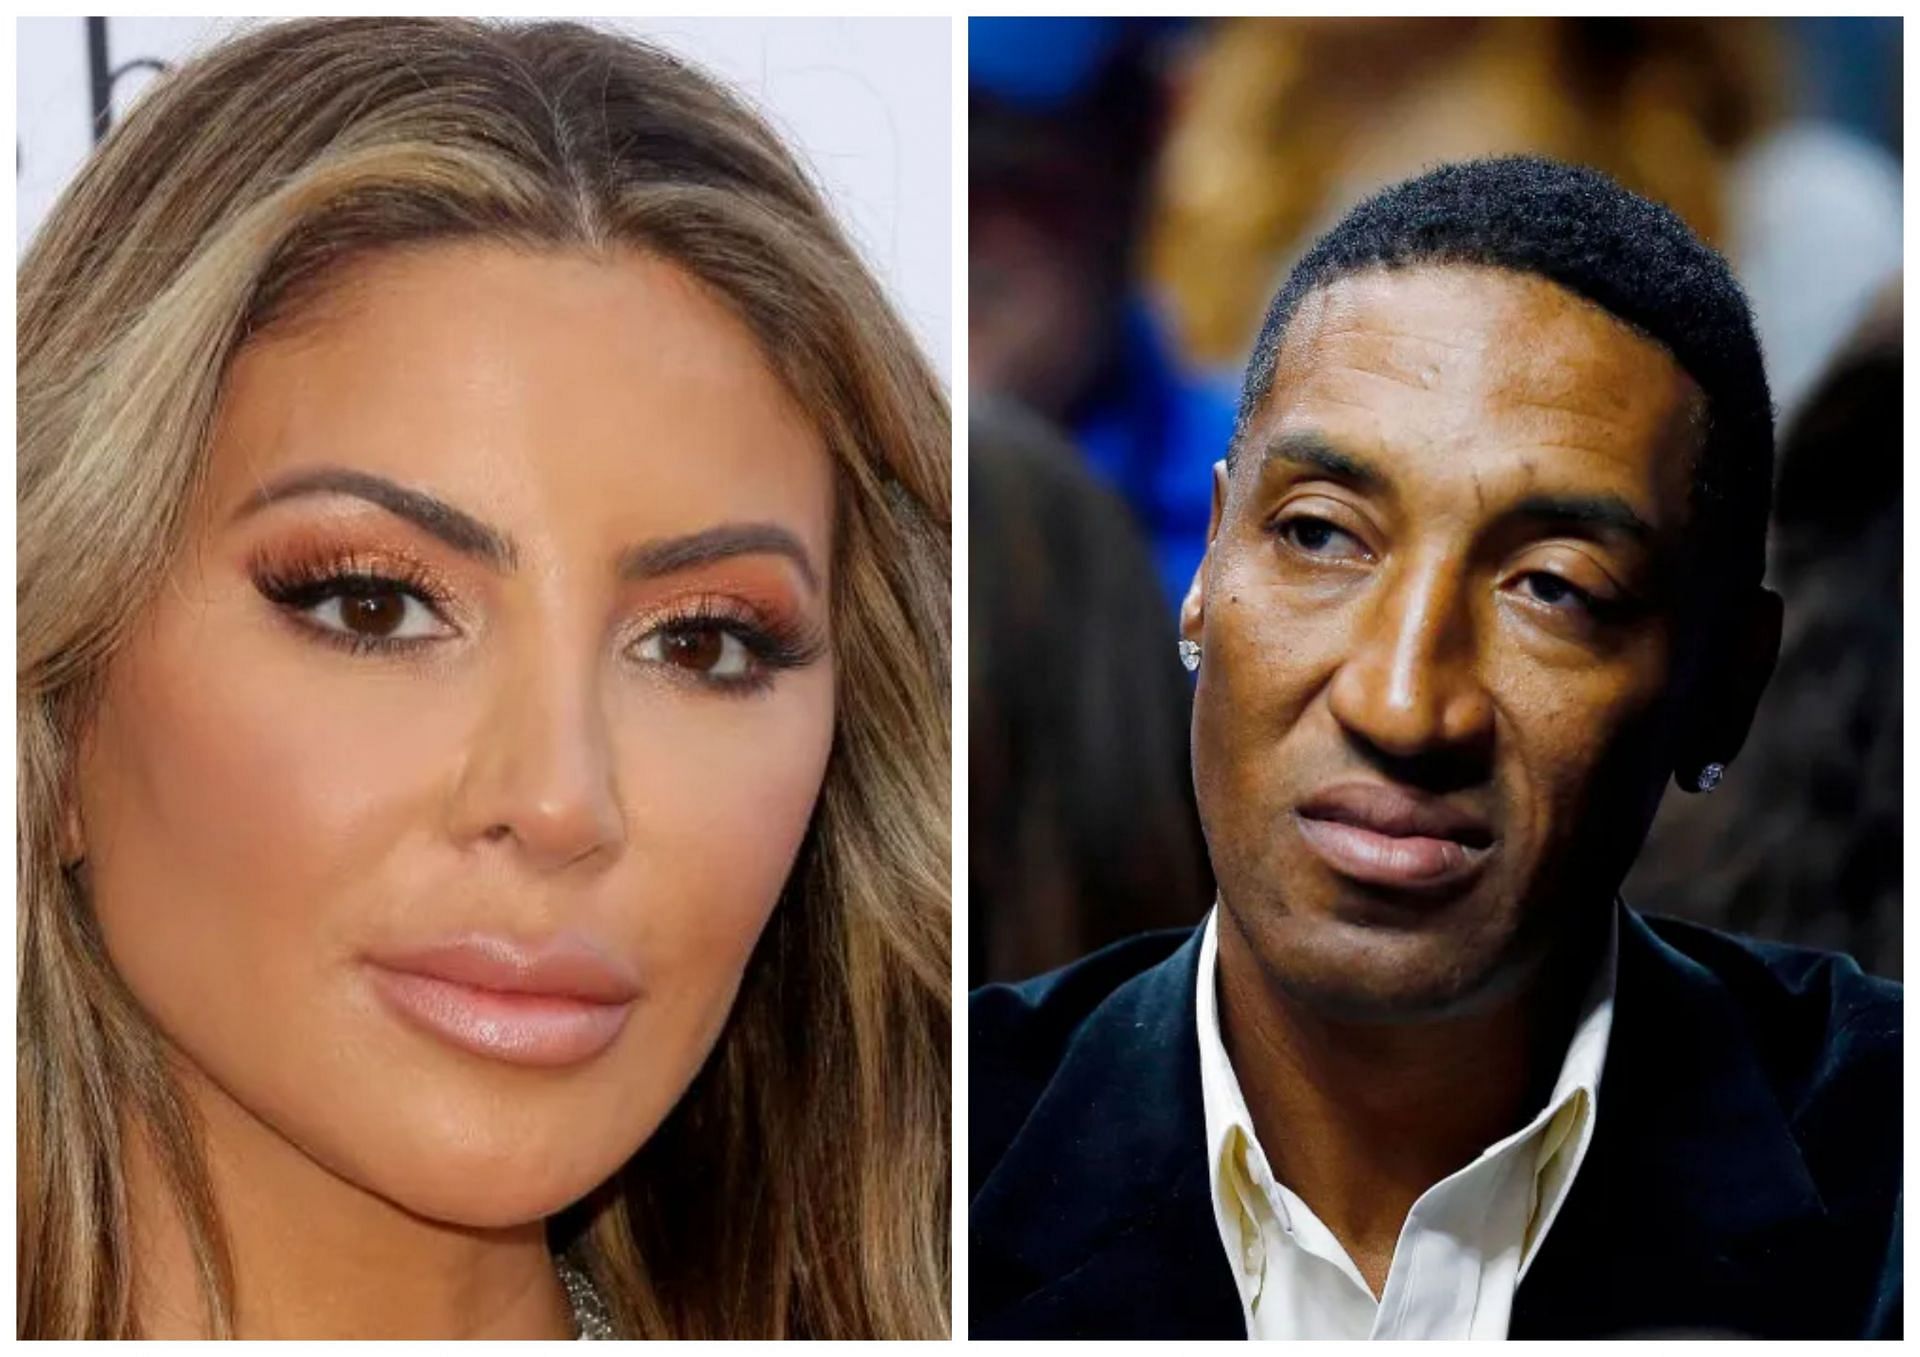 Larsa Pippen (left) and her ex-husband Scottie Pippen (right) were married for 19 years. They officially got a divorce in December of 2021